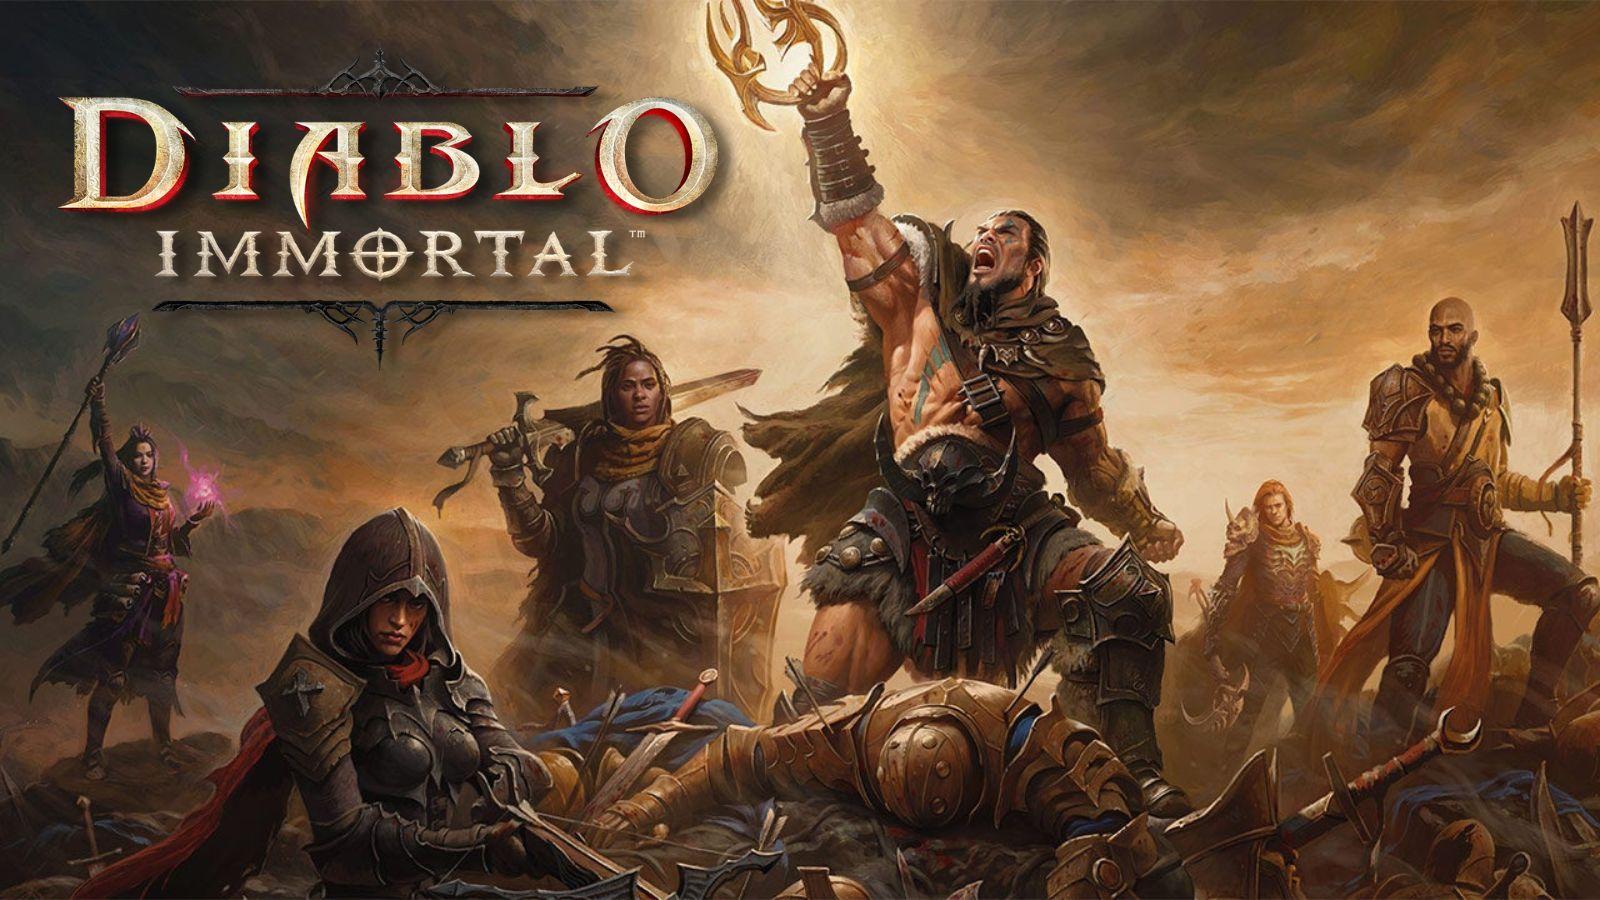 Diablo Immortal is a game designed to exploit your love of Diablo